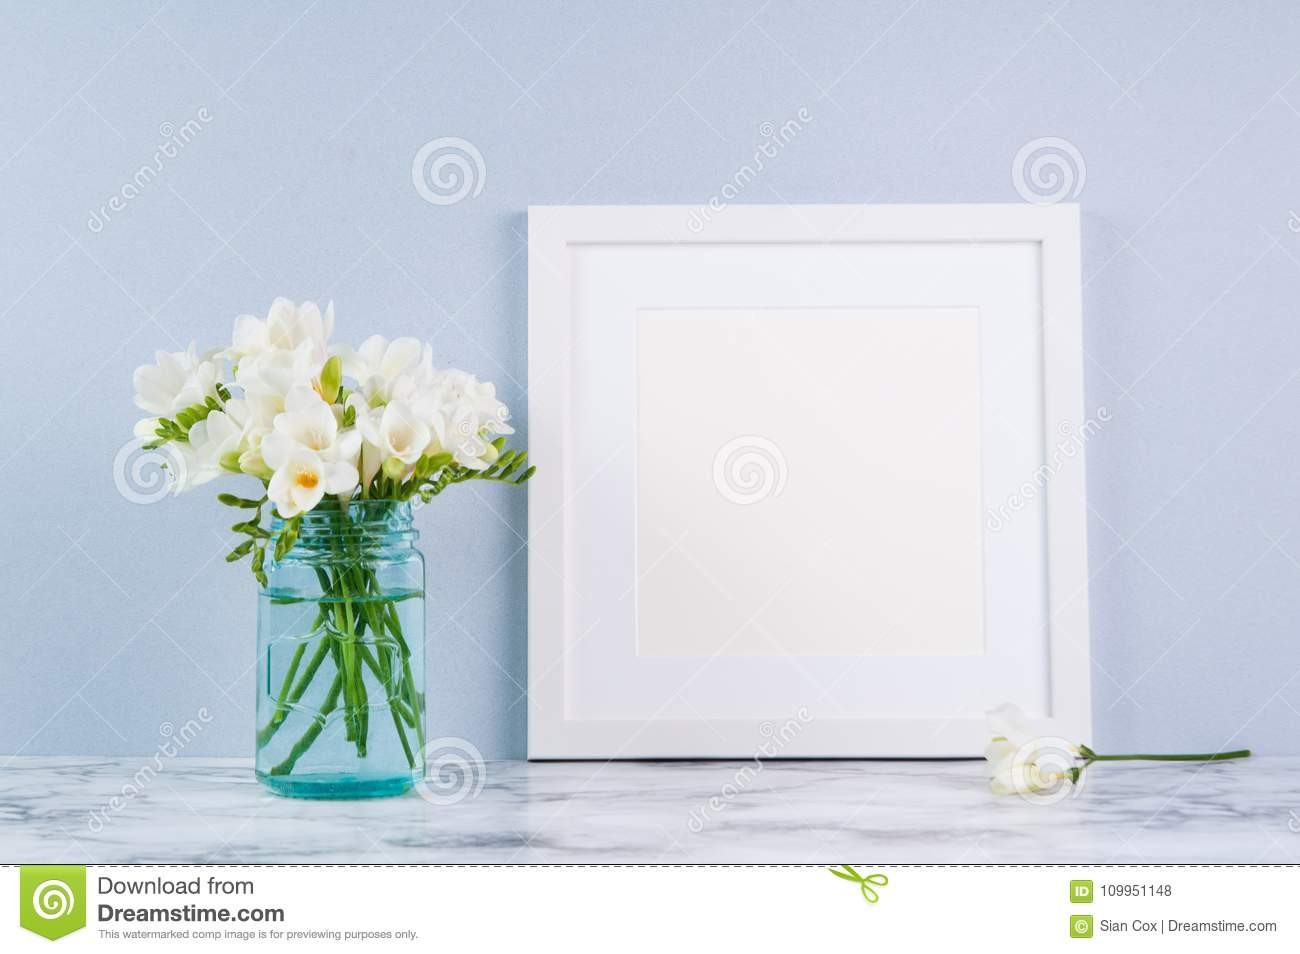 24 Awesome Square Glass Wall Vase 2023 free download square glass wall vase of 27 beautiful flower arrangements square vases flower decoration ideas with regard to flower arrangements square vases luxury frame mockup stock photo image of mock 